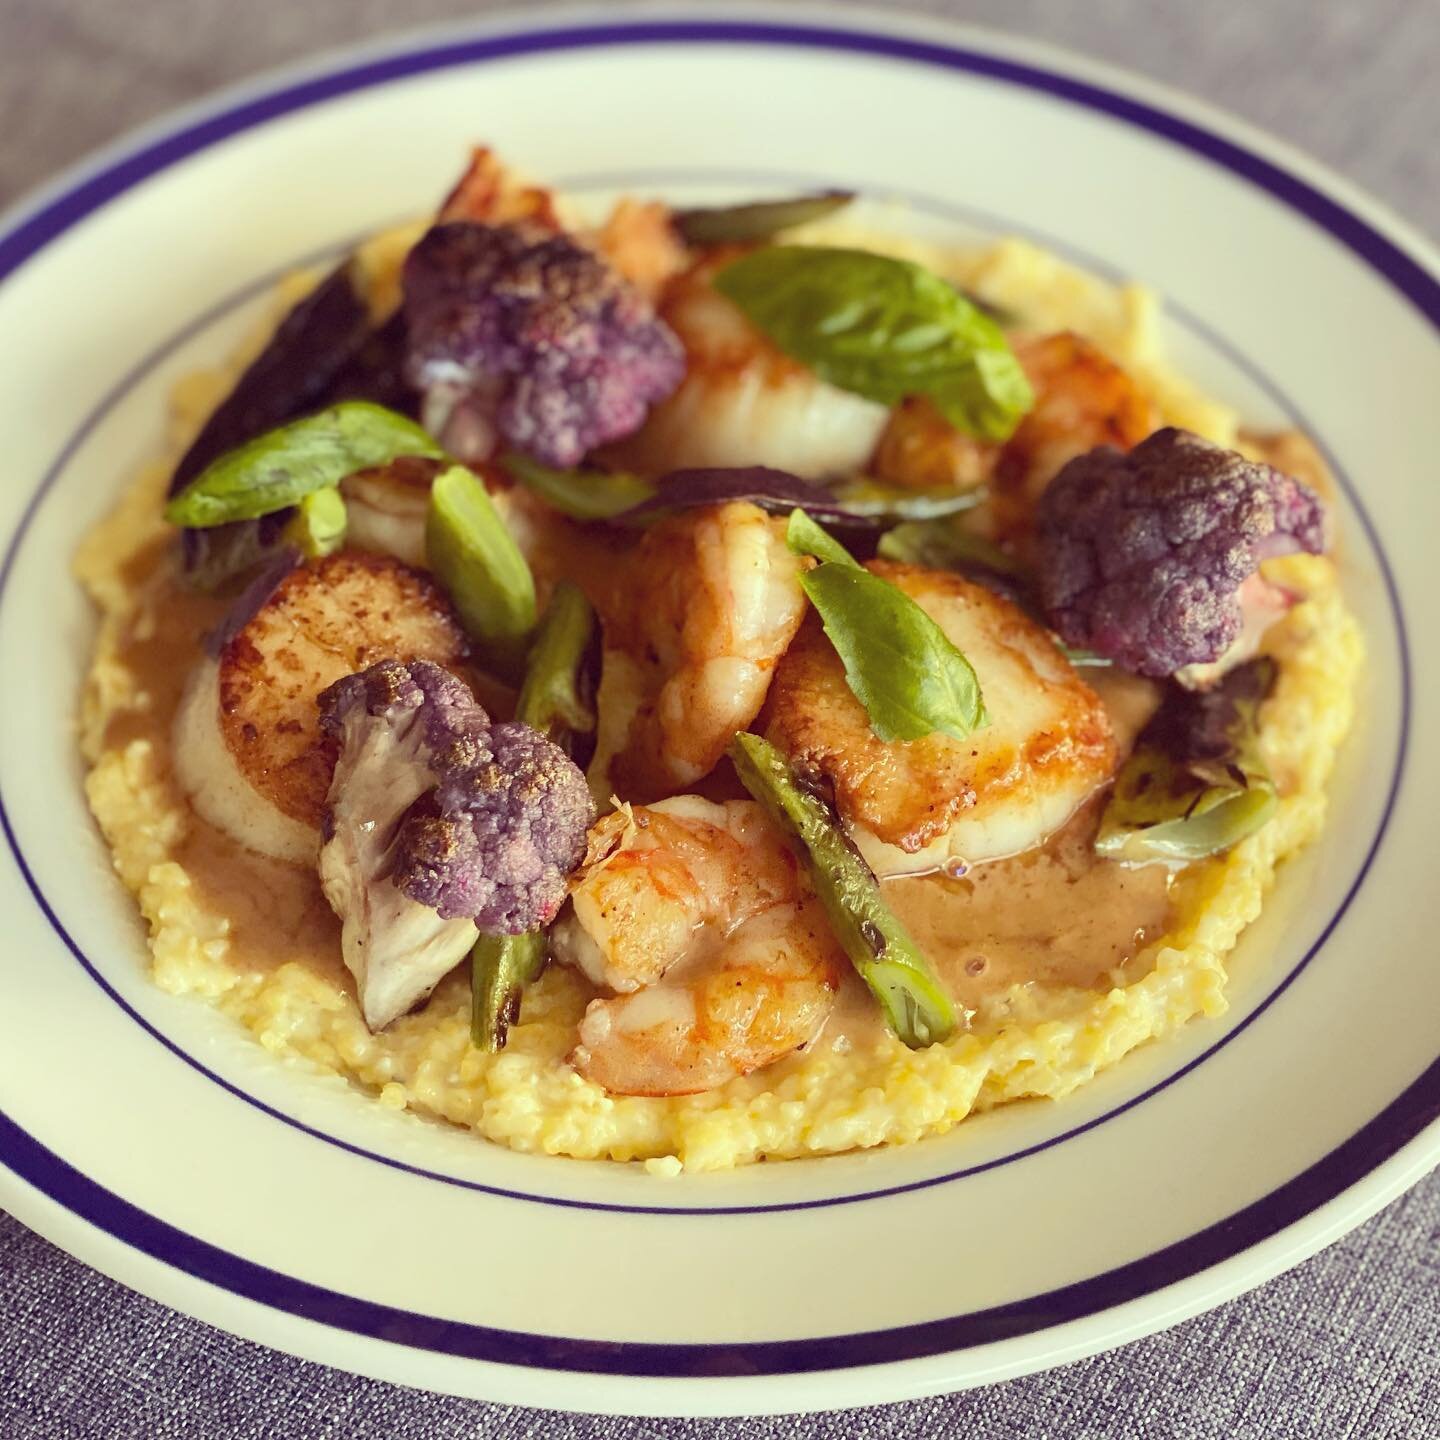 We&rsquo;ve decided that this is a new take on a classic: scallops AND shrimp AND grits! Adorned with grilled Romano beans, purple cauliflower, and a hard cider sauce, this is the perfect market meal to welcome Summer.